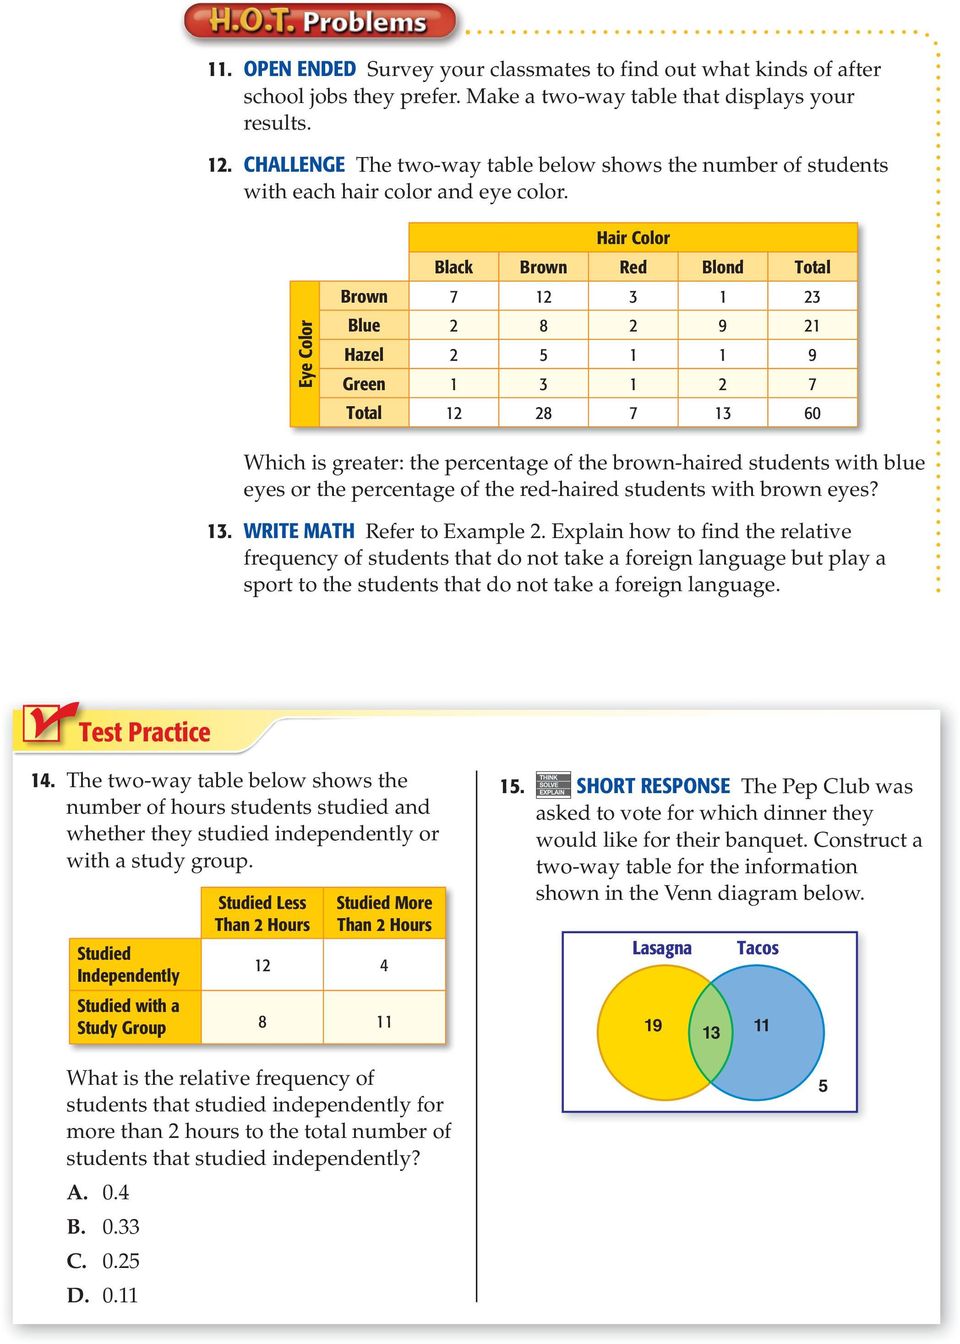 Two Way Tables Lesson 16 Main Idea New Vocabulary Two Way Table Relative Frequency Pdf Free Download